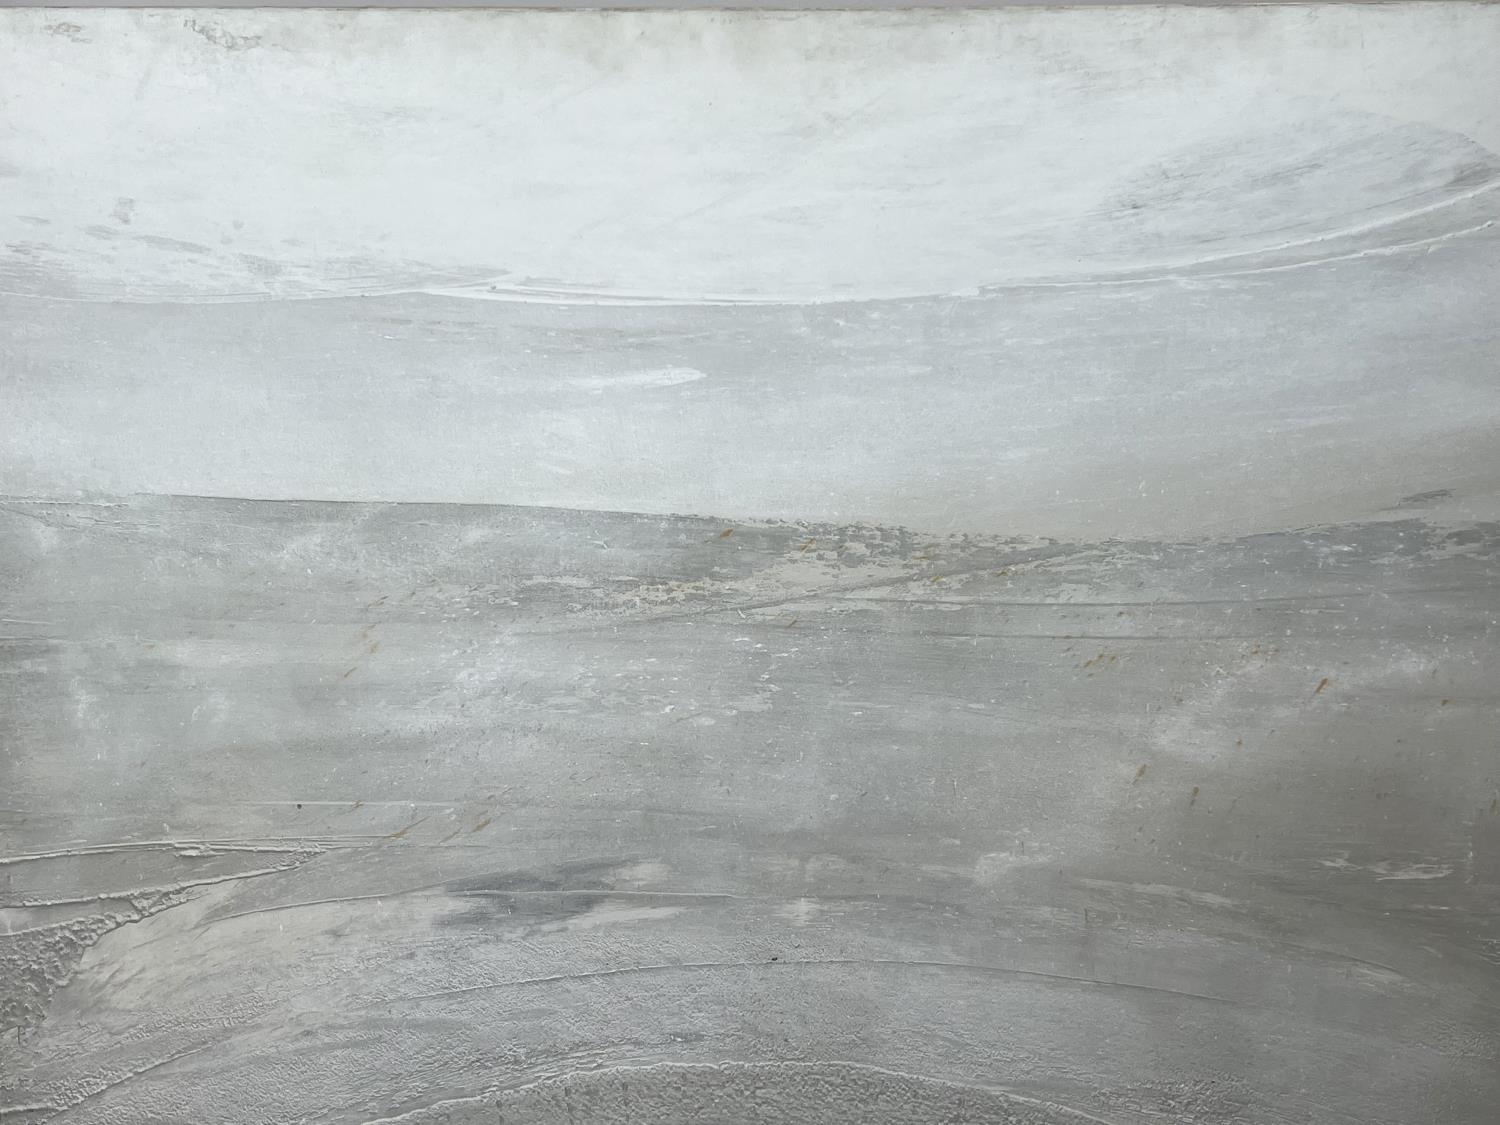 PS NAGGAR, 'White landscape', oil on canvas, 114cm x 146cm, inscribed verso. - Image 2 of 5